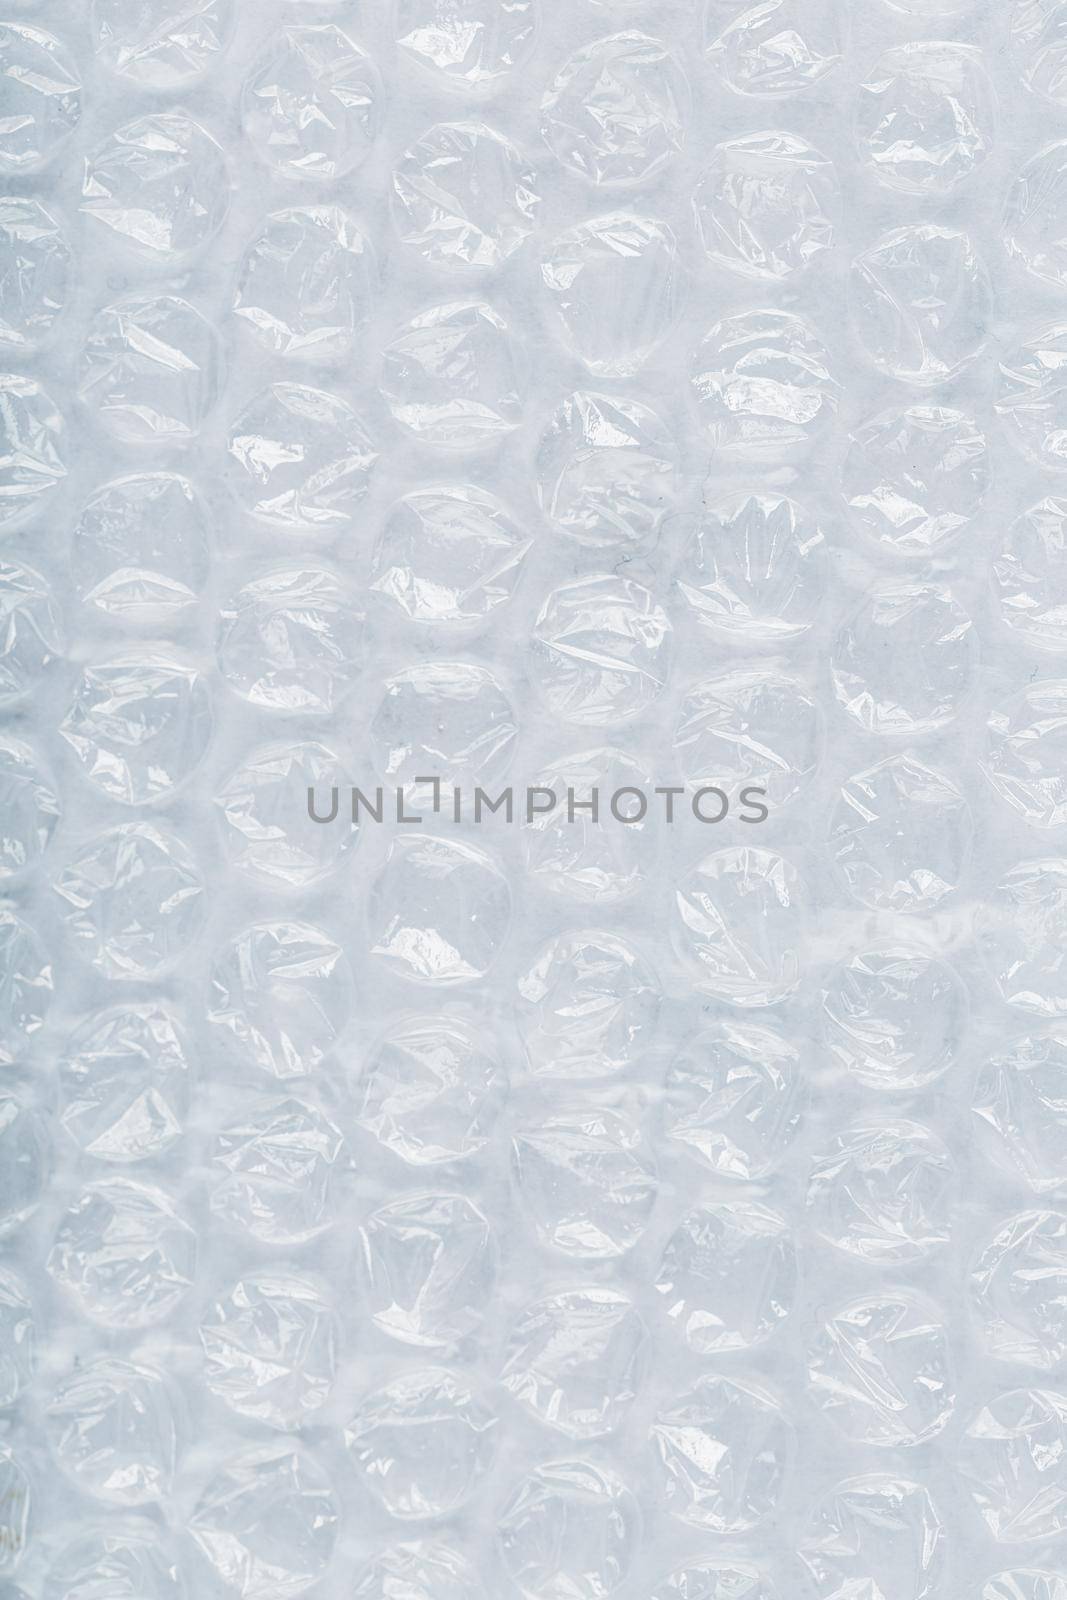 Packing bubble wrap for parcels on a White background in full screen